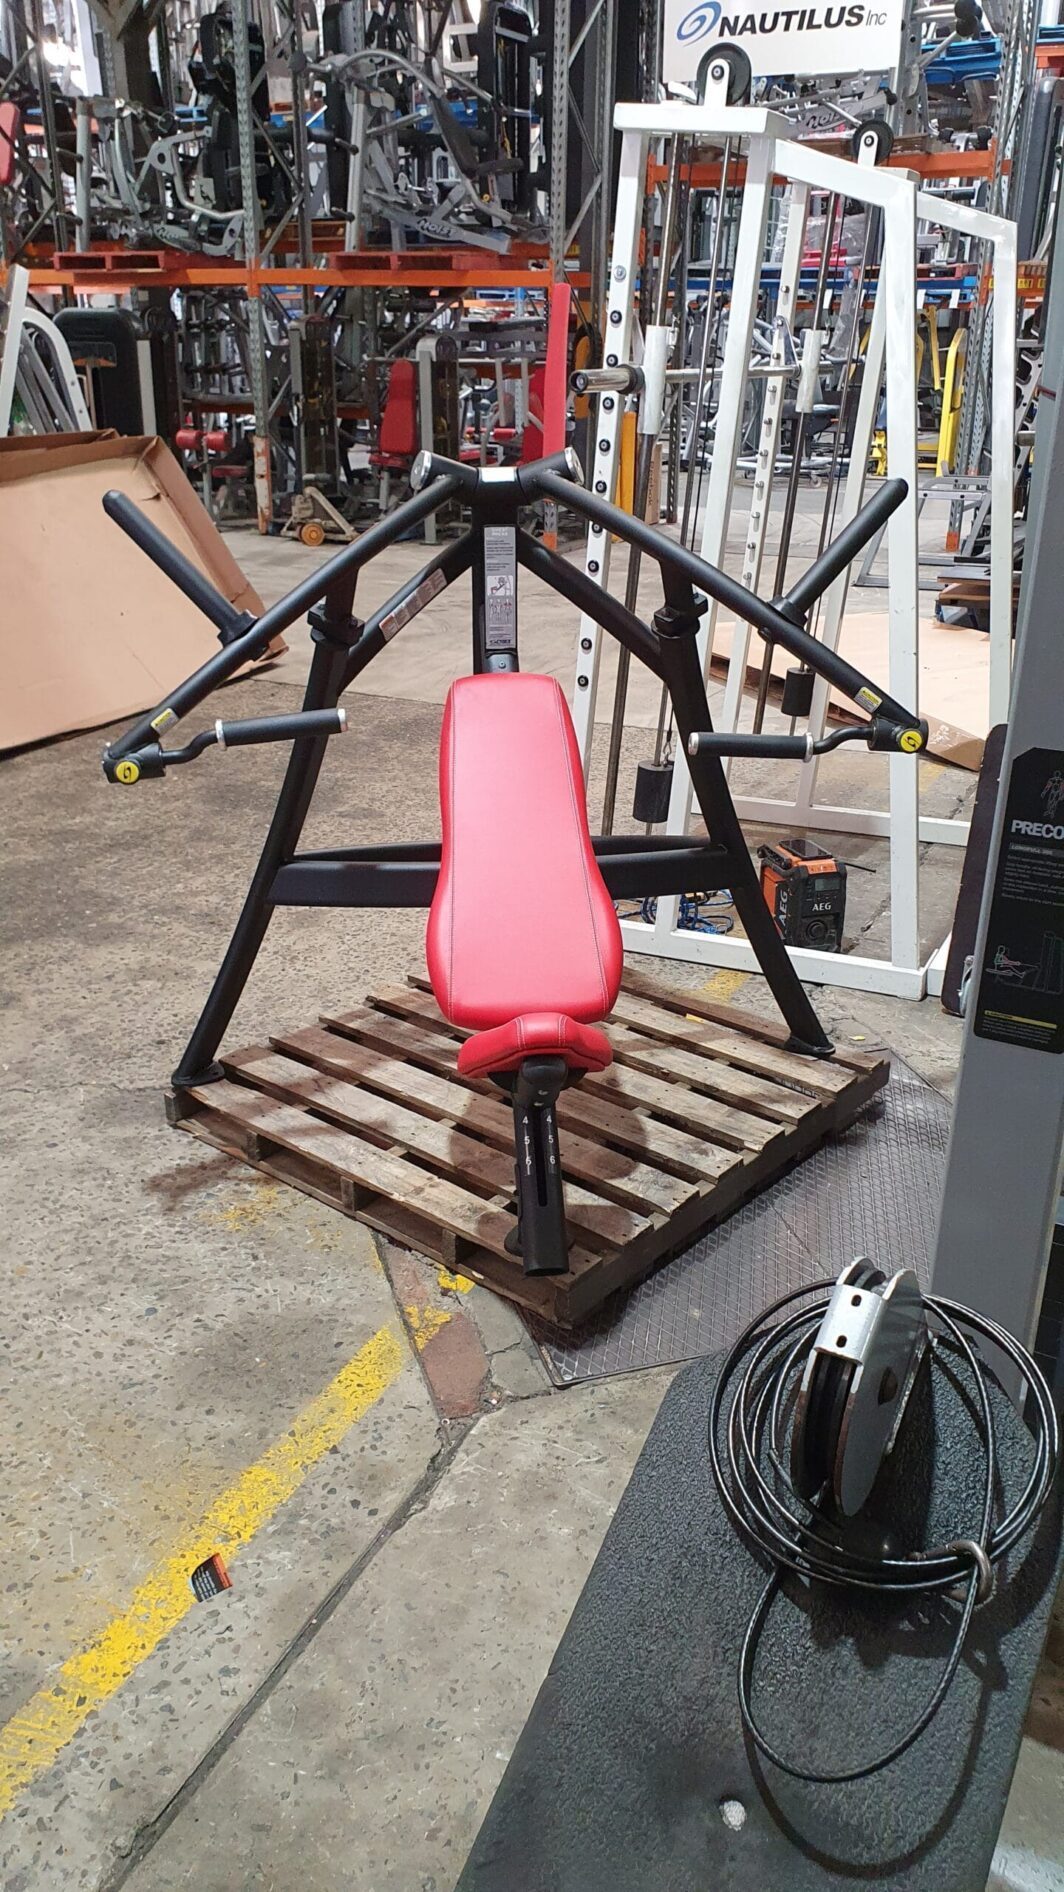 CYBEX Plate Loaded Chest Press front view second hand gym equipment